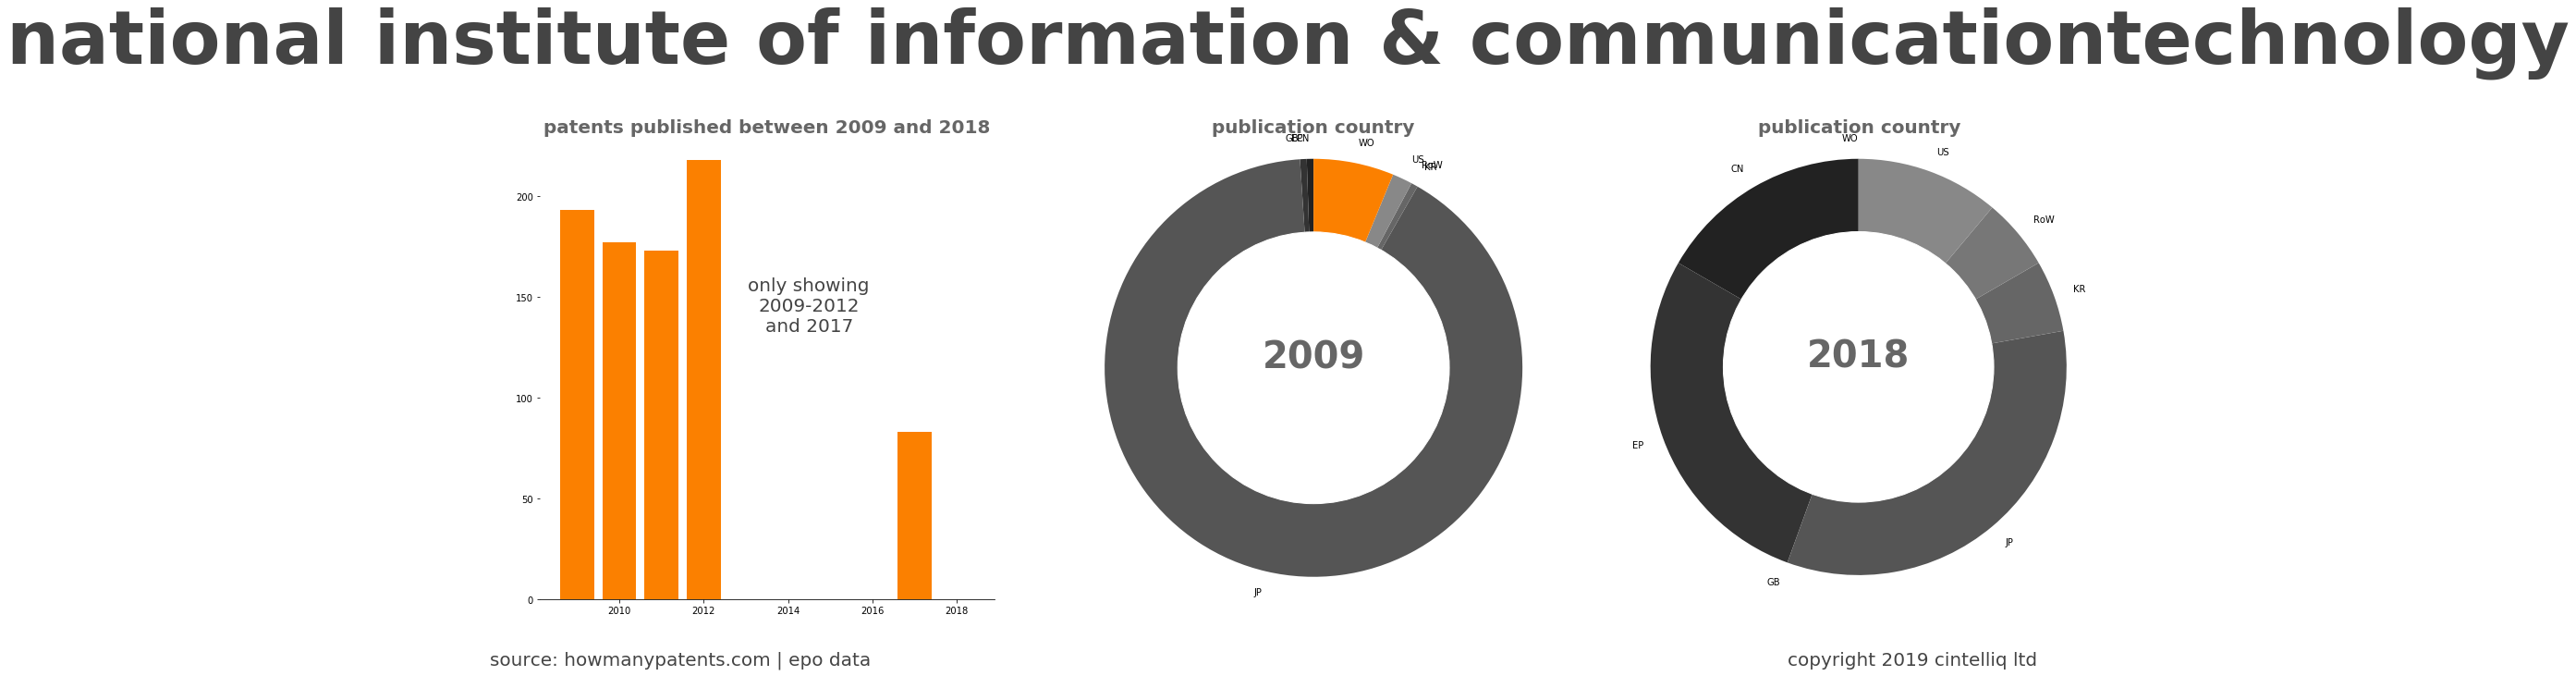 summary of patents for National Institute Of Information & Communicationtechnology